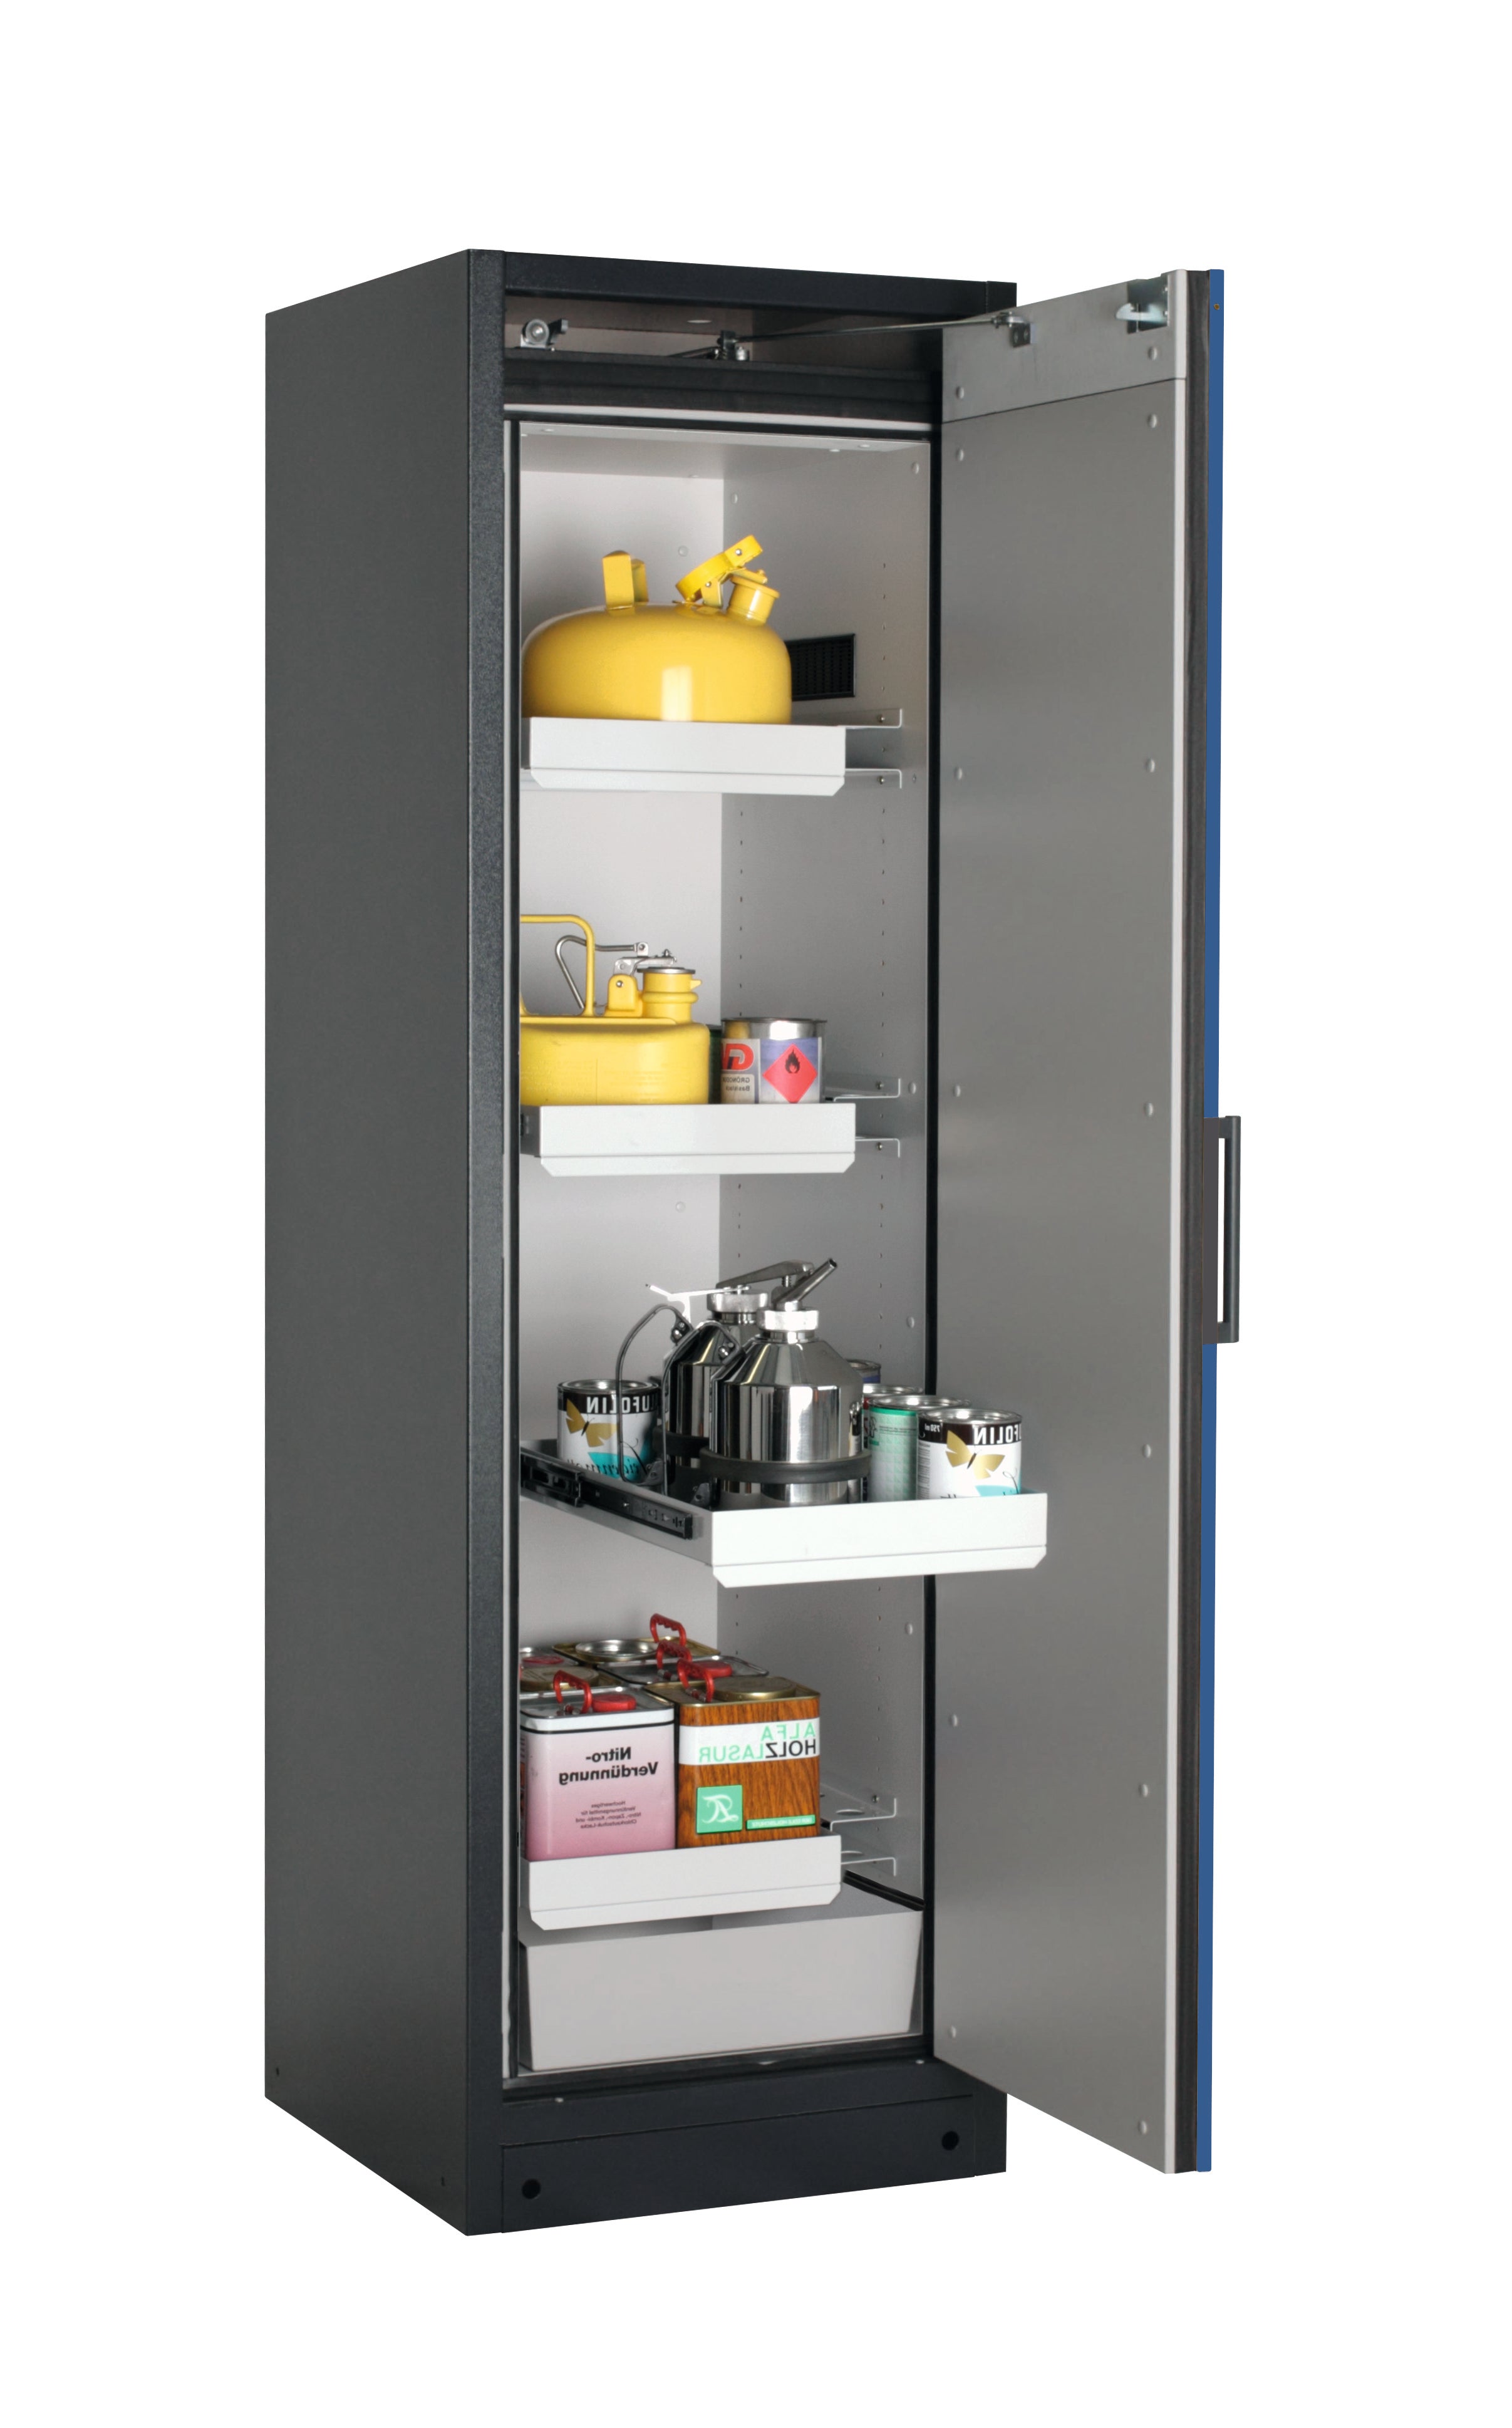 Type 90 safety storage cabinet Q-PEGASUS-90 model Q90.195.060.WDACR in gentian blue RAL 5010 with 3x drawer (standard) (sheet steel),